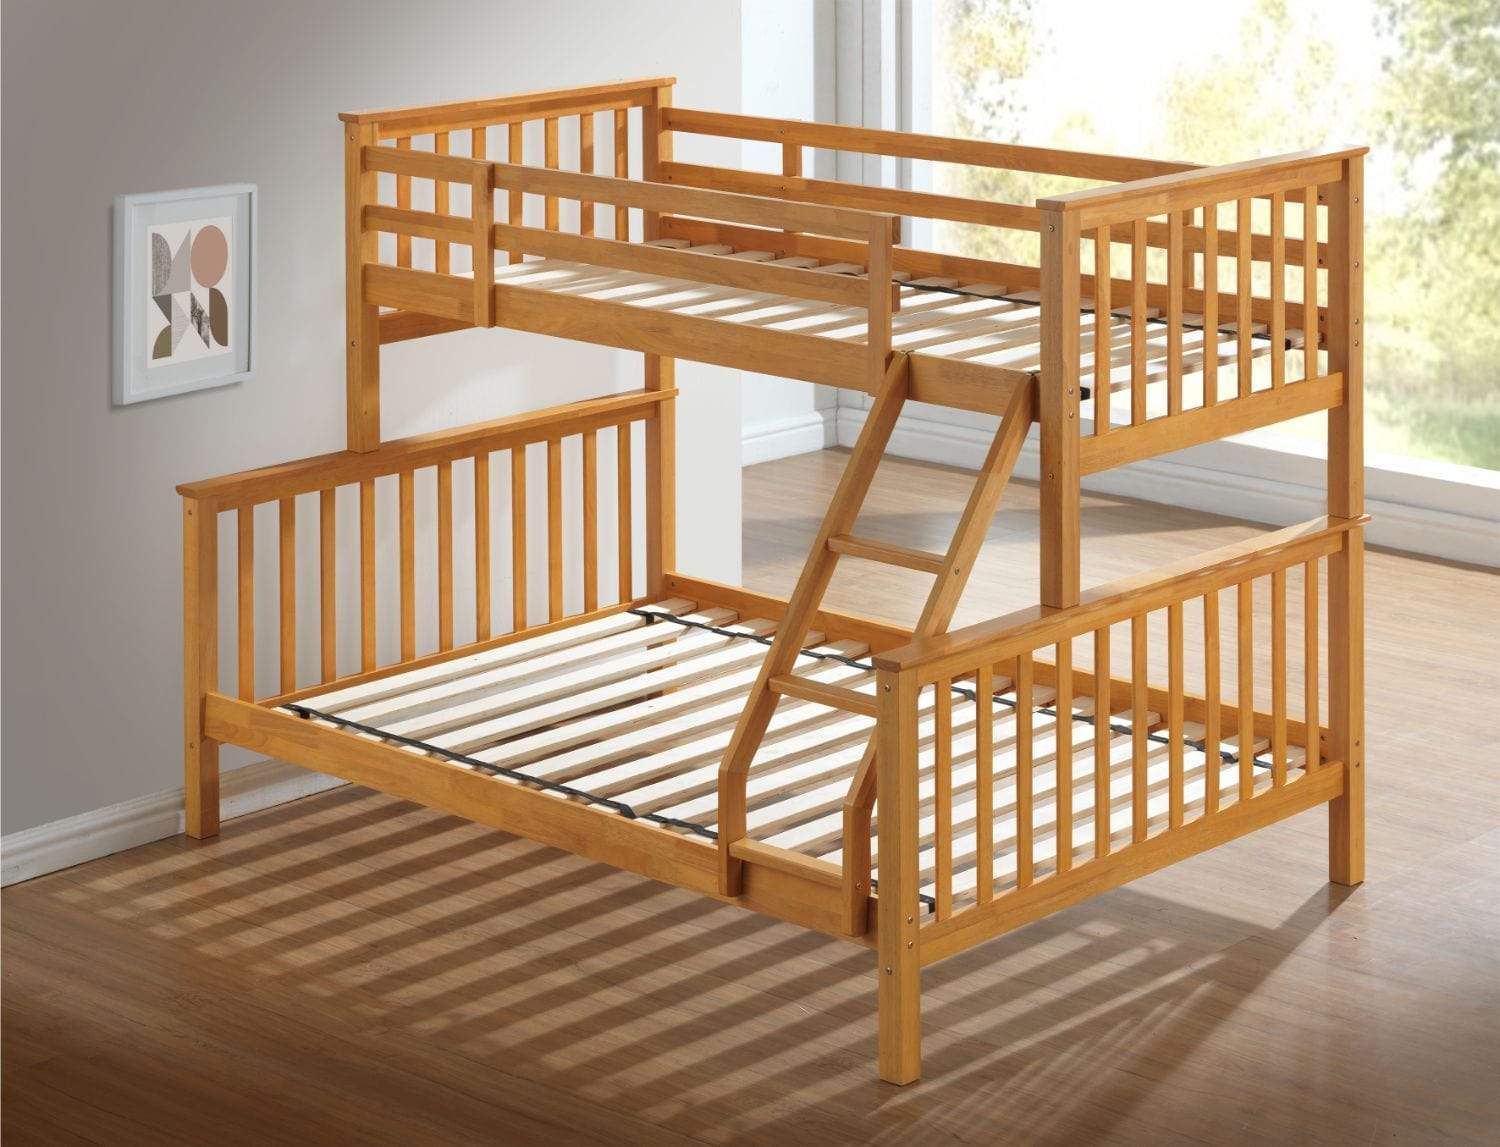 Artisan Bed Company Bunk Bed Charlotte 2 In 1 Beech Three Sleeper Bunk Bed